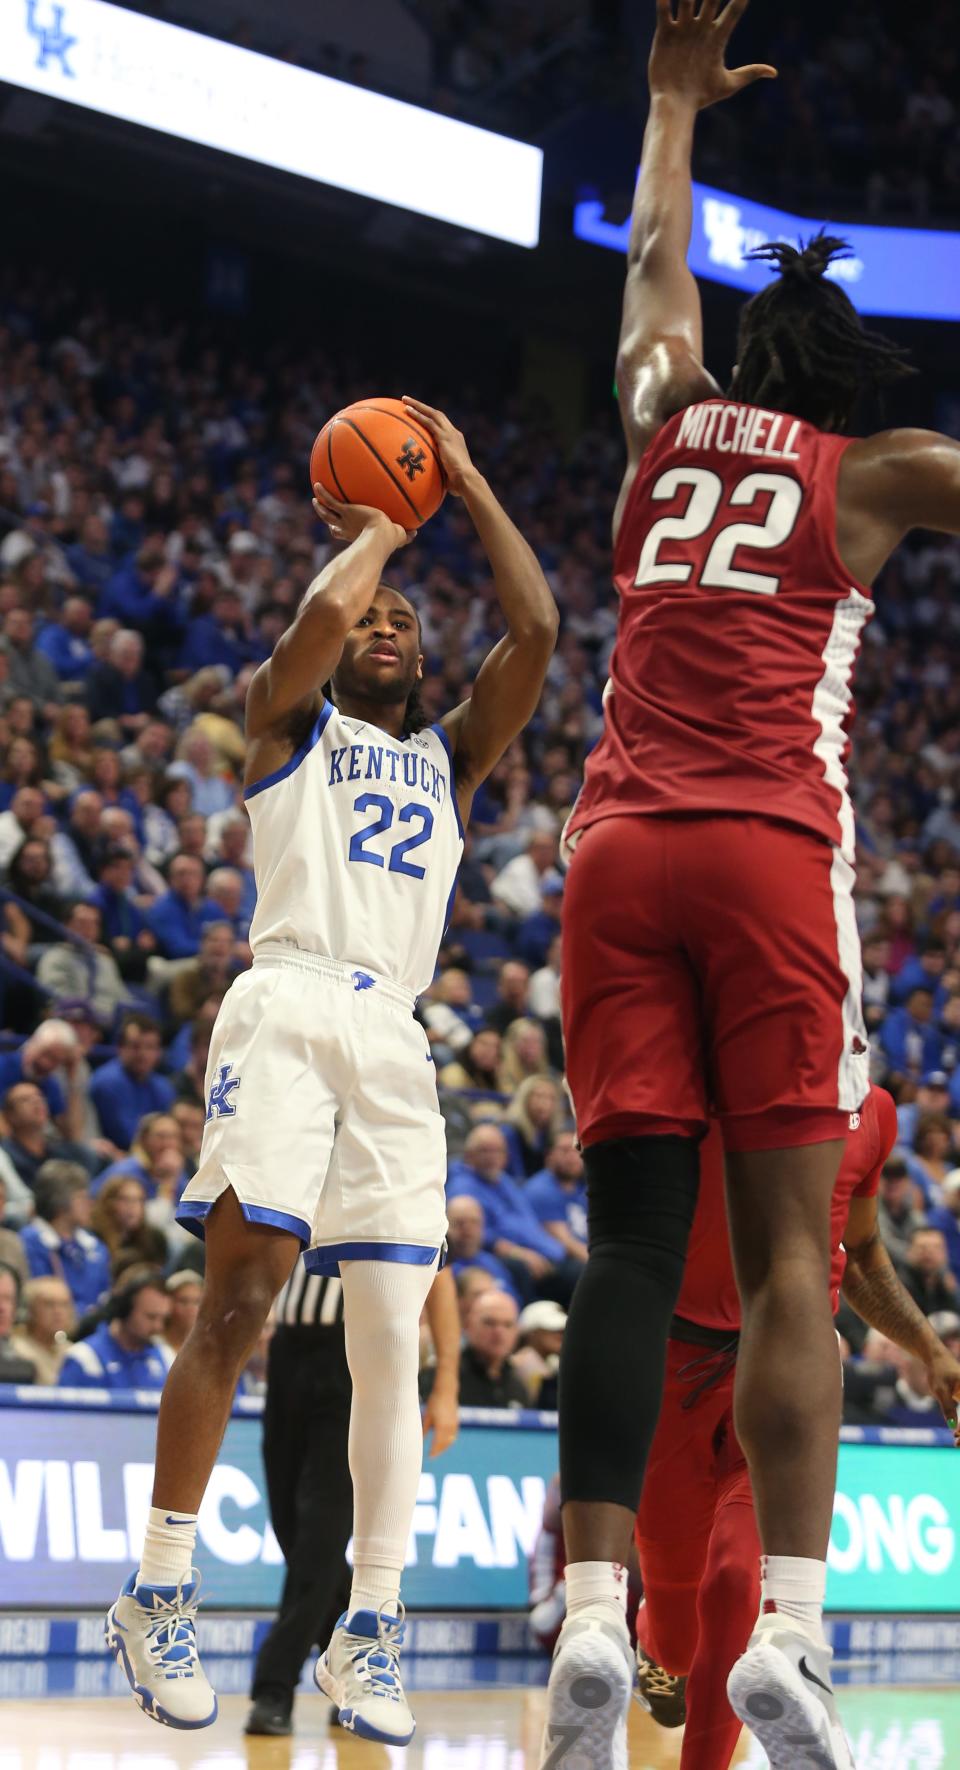 Kentucky’s Cason Wallace makes the basket and gets fouled against Arkansas’ Makhel Mitchell.Feb. 7, 2023